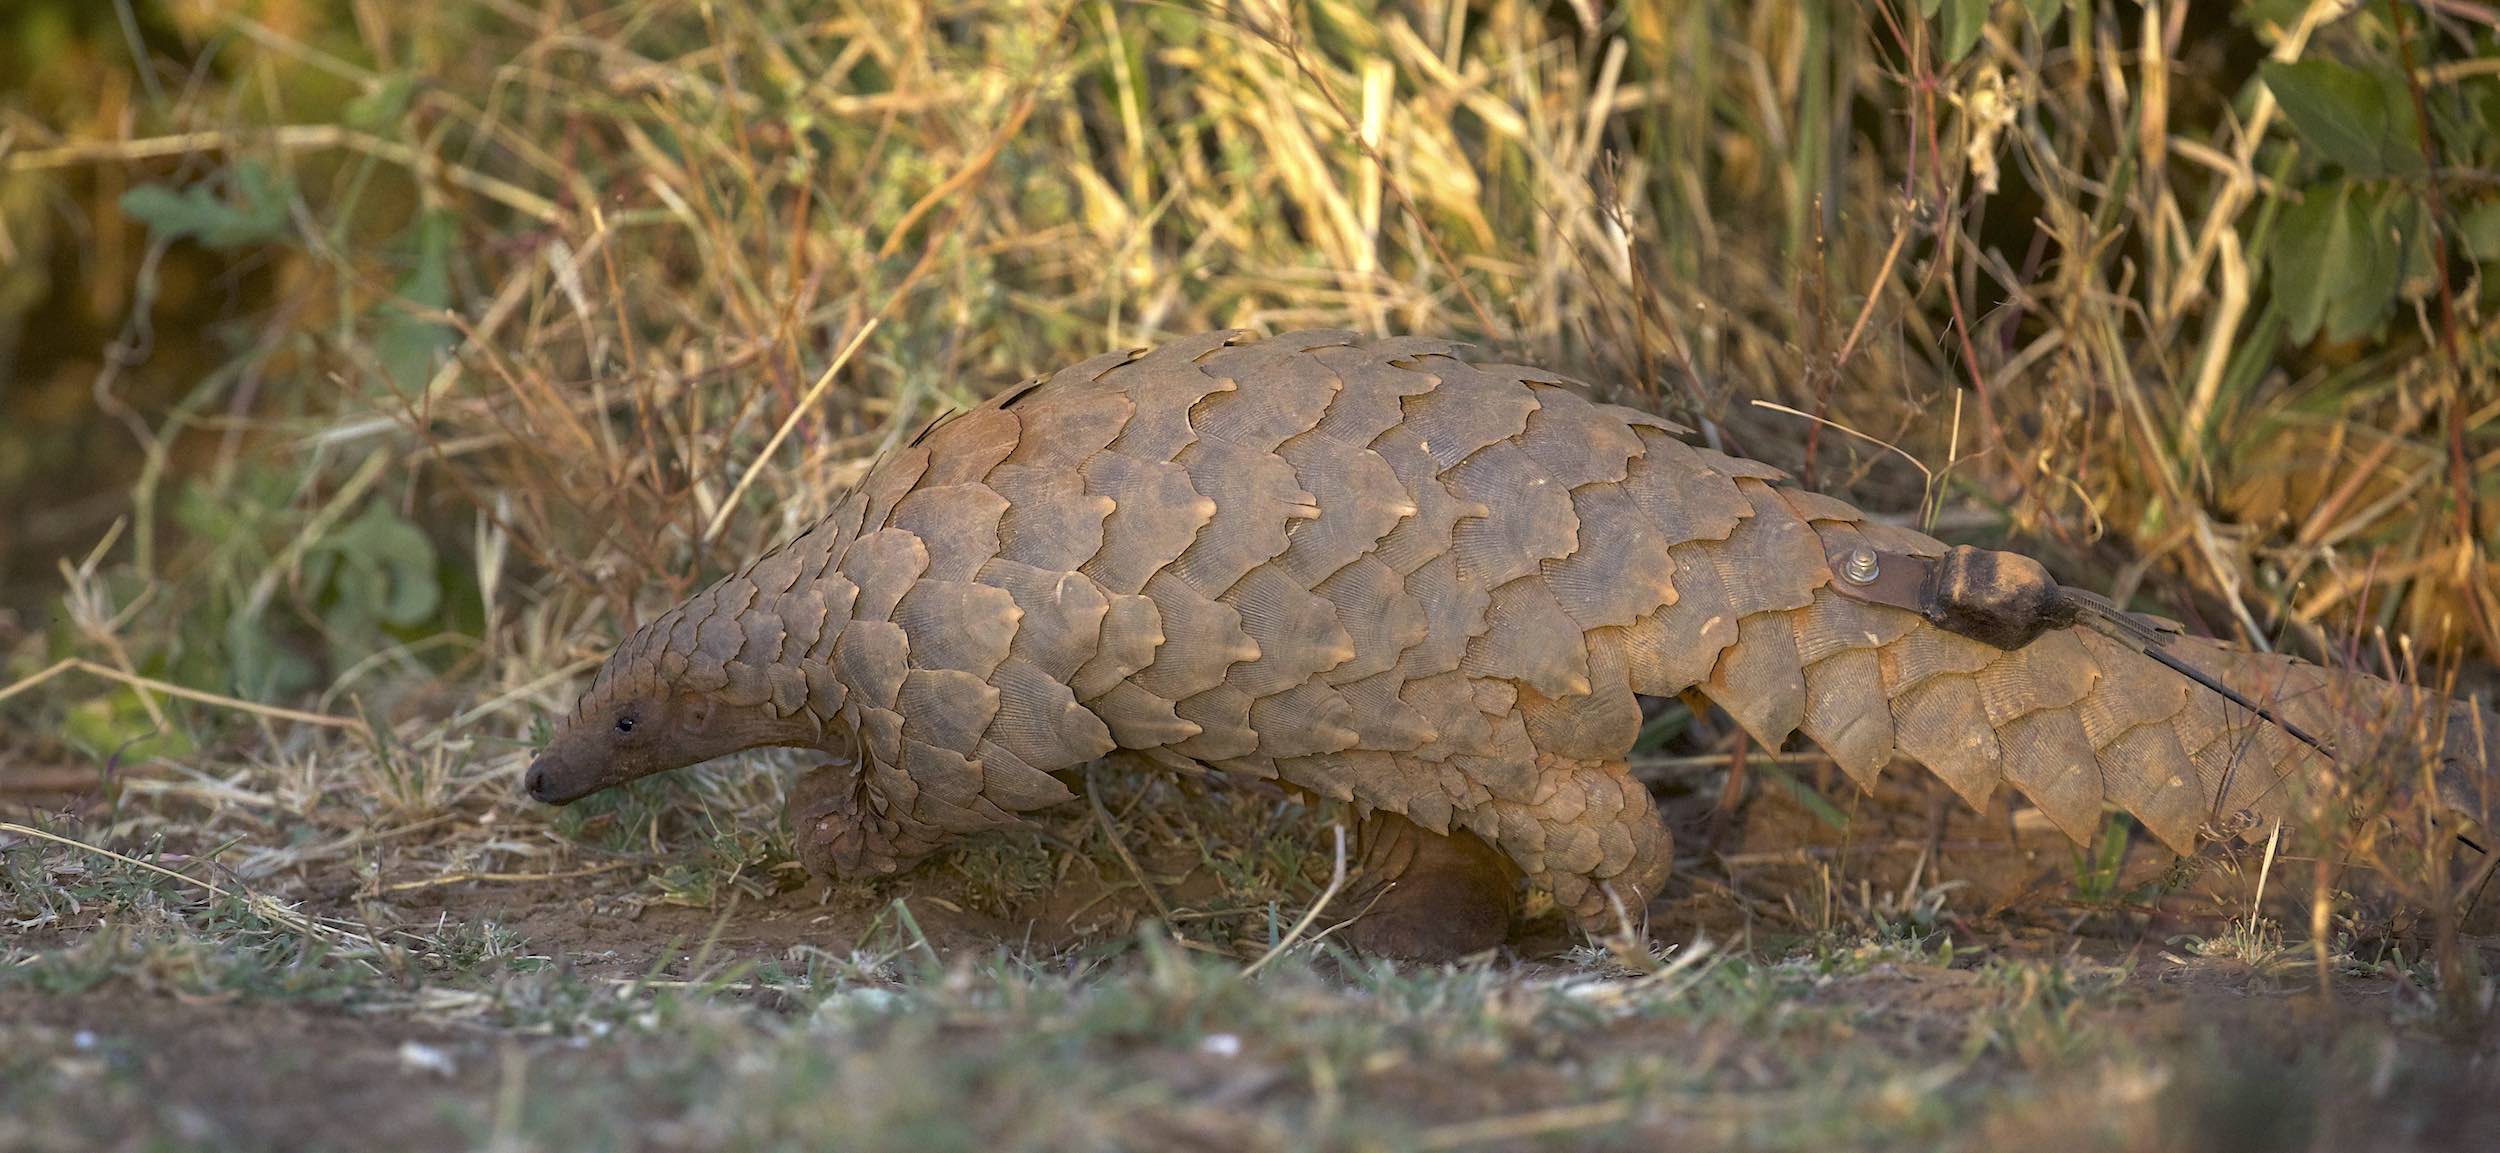 A pangolin fitted with a tracking device forages in thick bush.